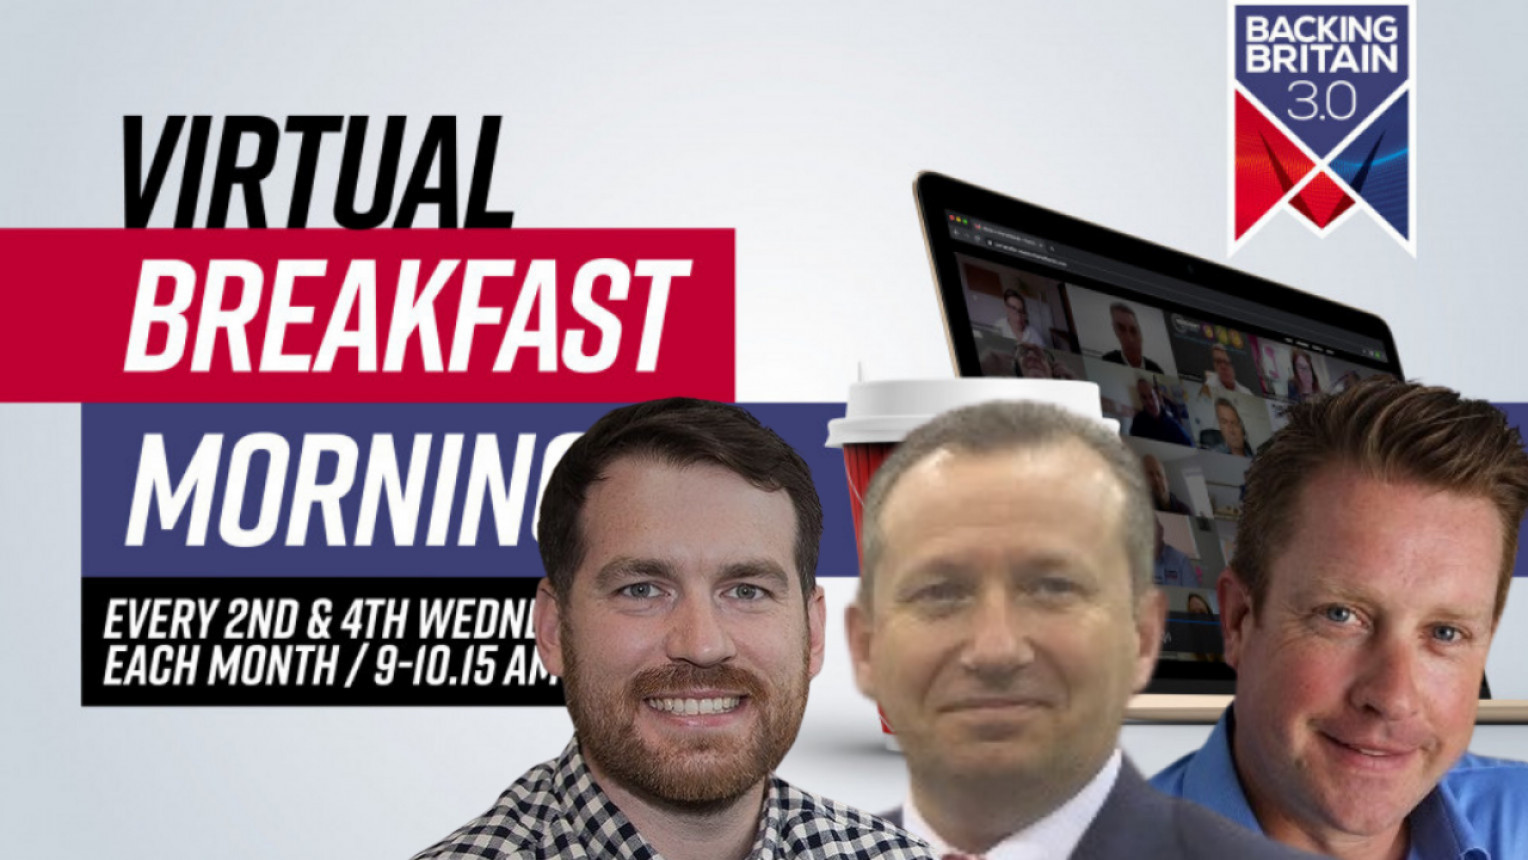 Backing Britain Virtual Breakfast Morning with Micro-Mesh, Engineering Technology Group (ETG) and Pegler